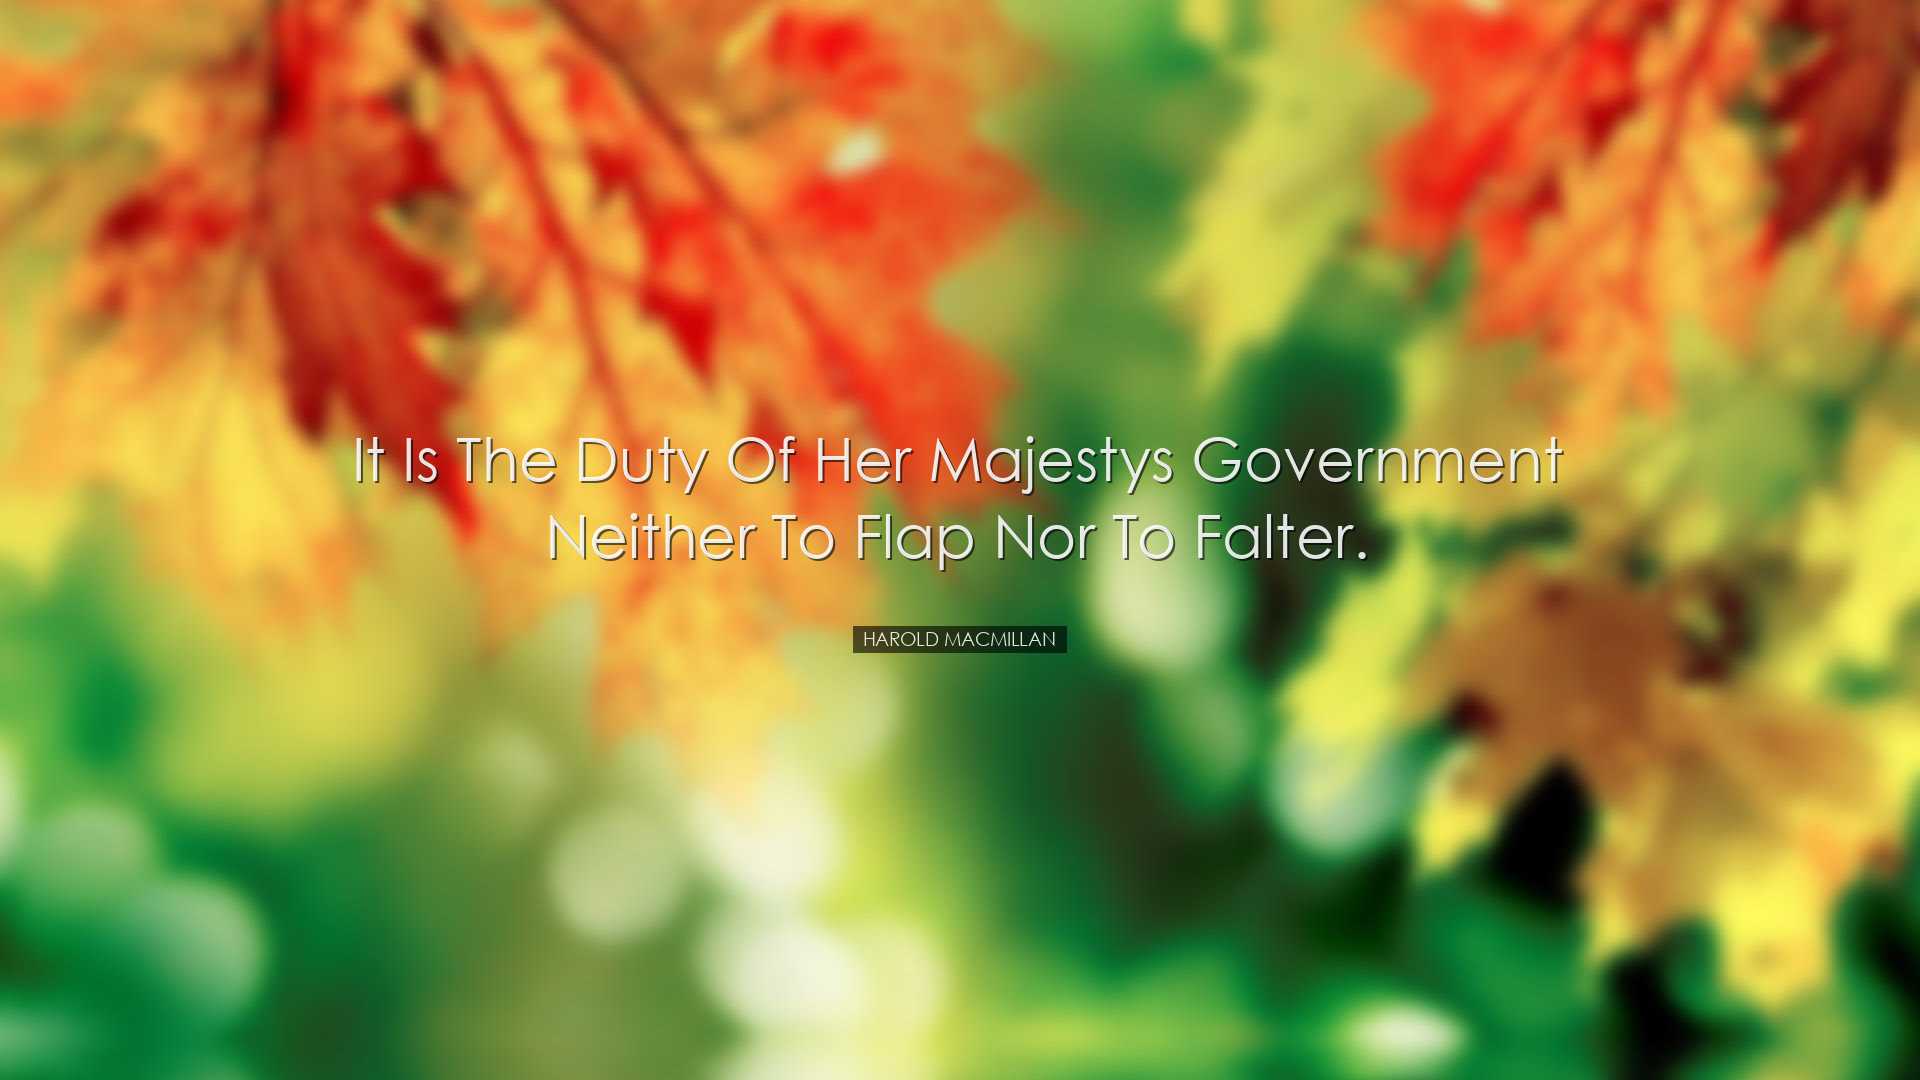 It is the duty of Her Majestys government neither to flap nor to f